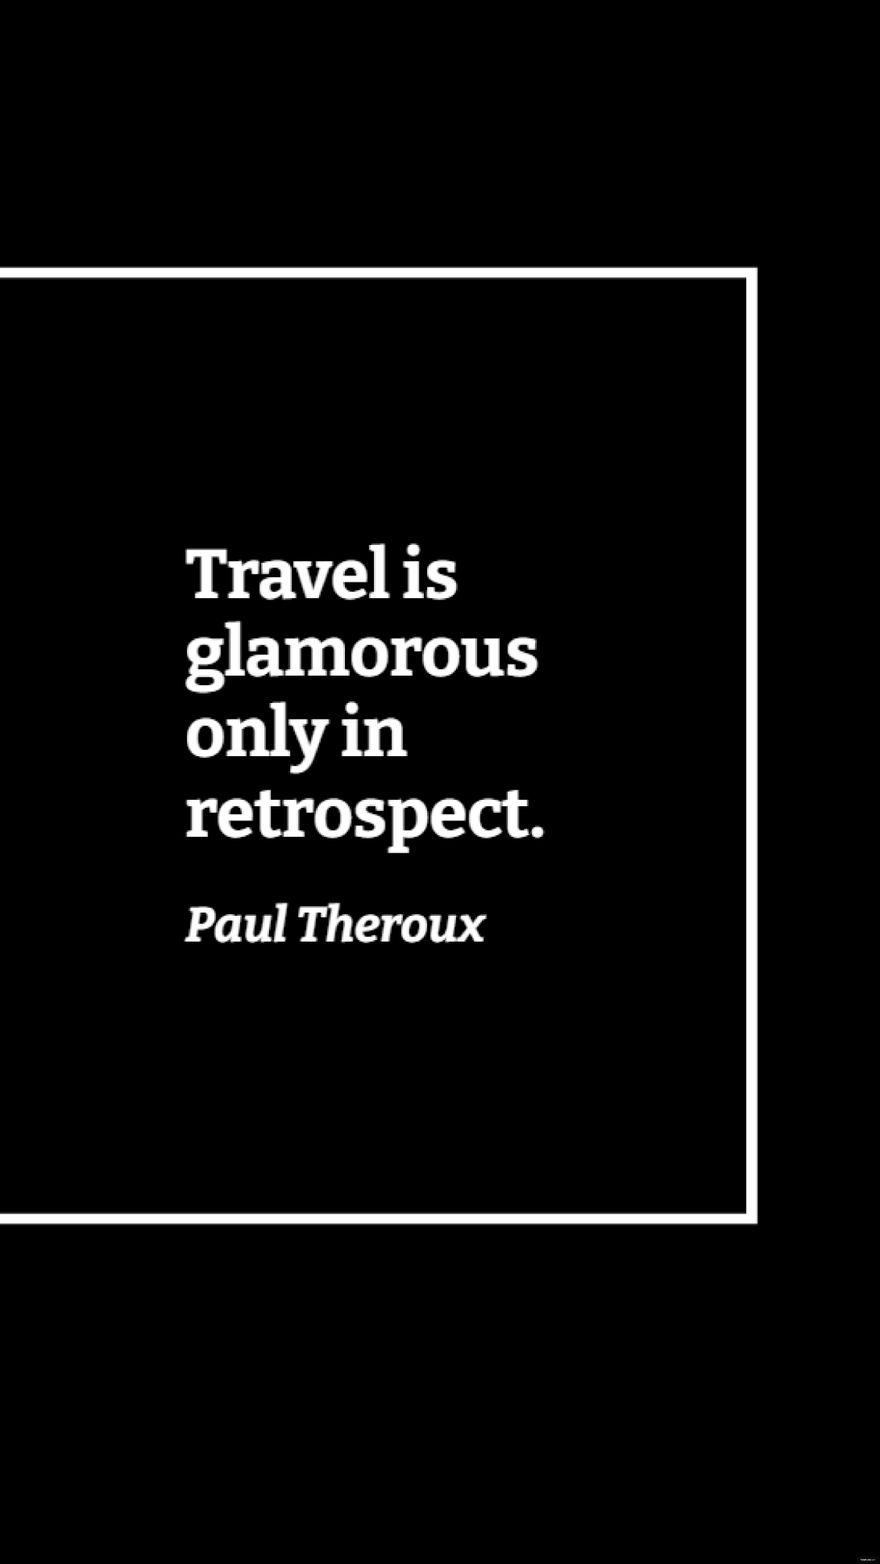 Free Paul Theroux - Travel is glamorous only in retrospect.